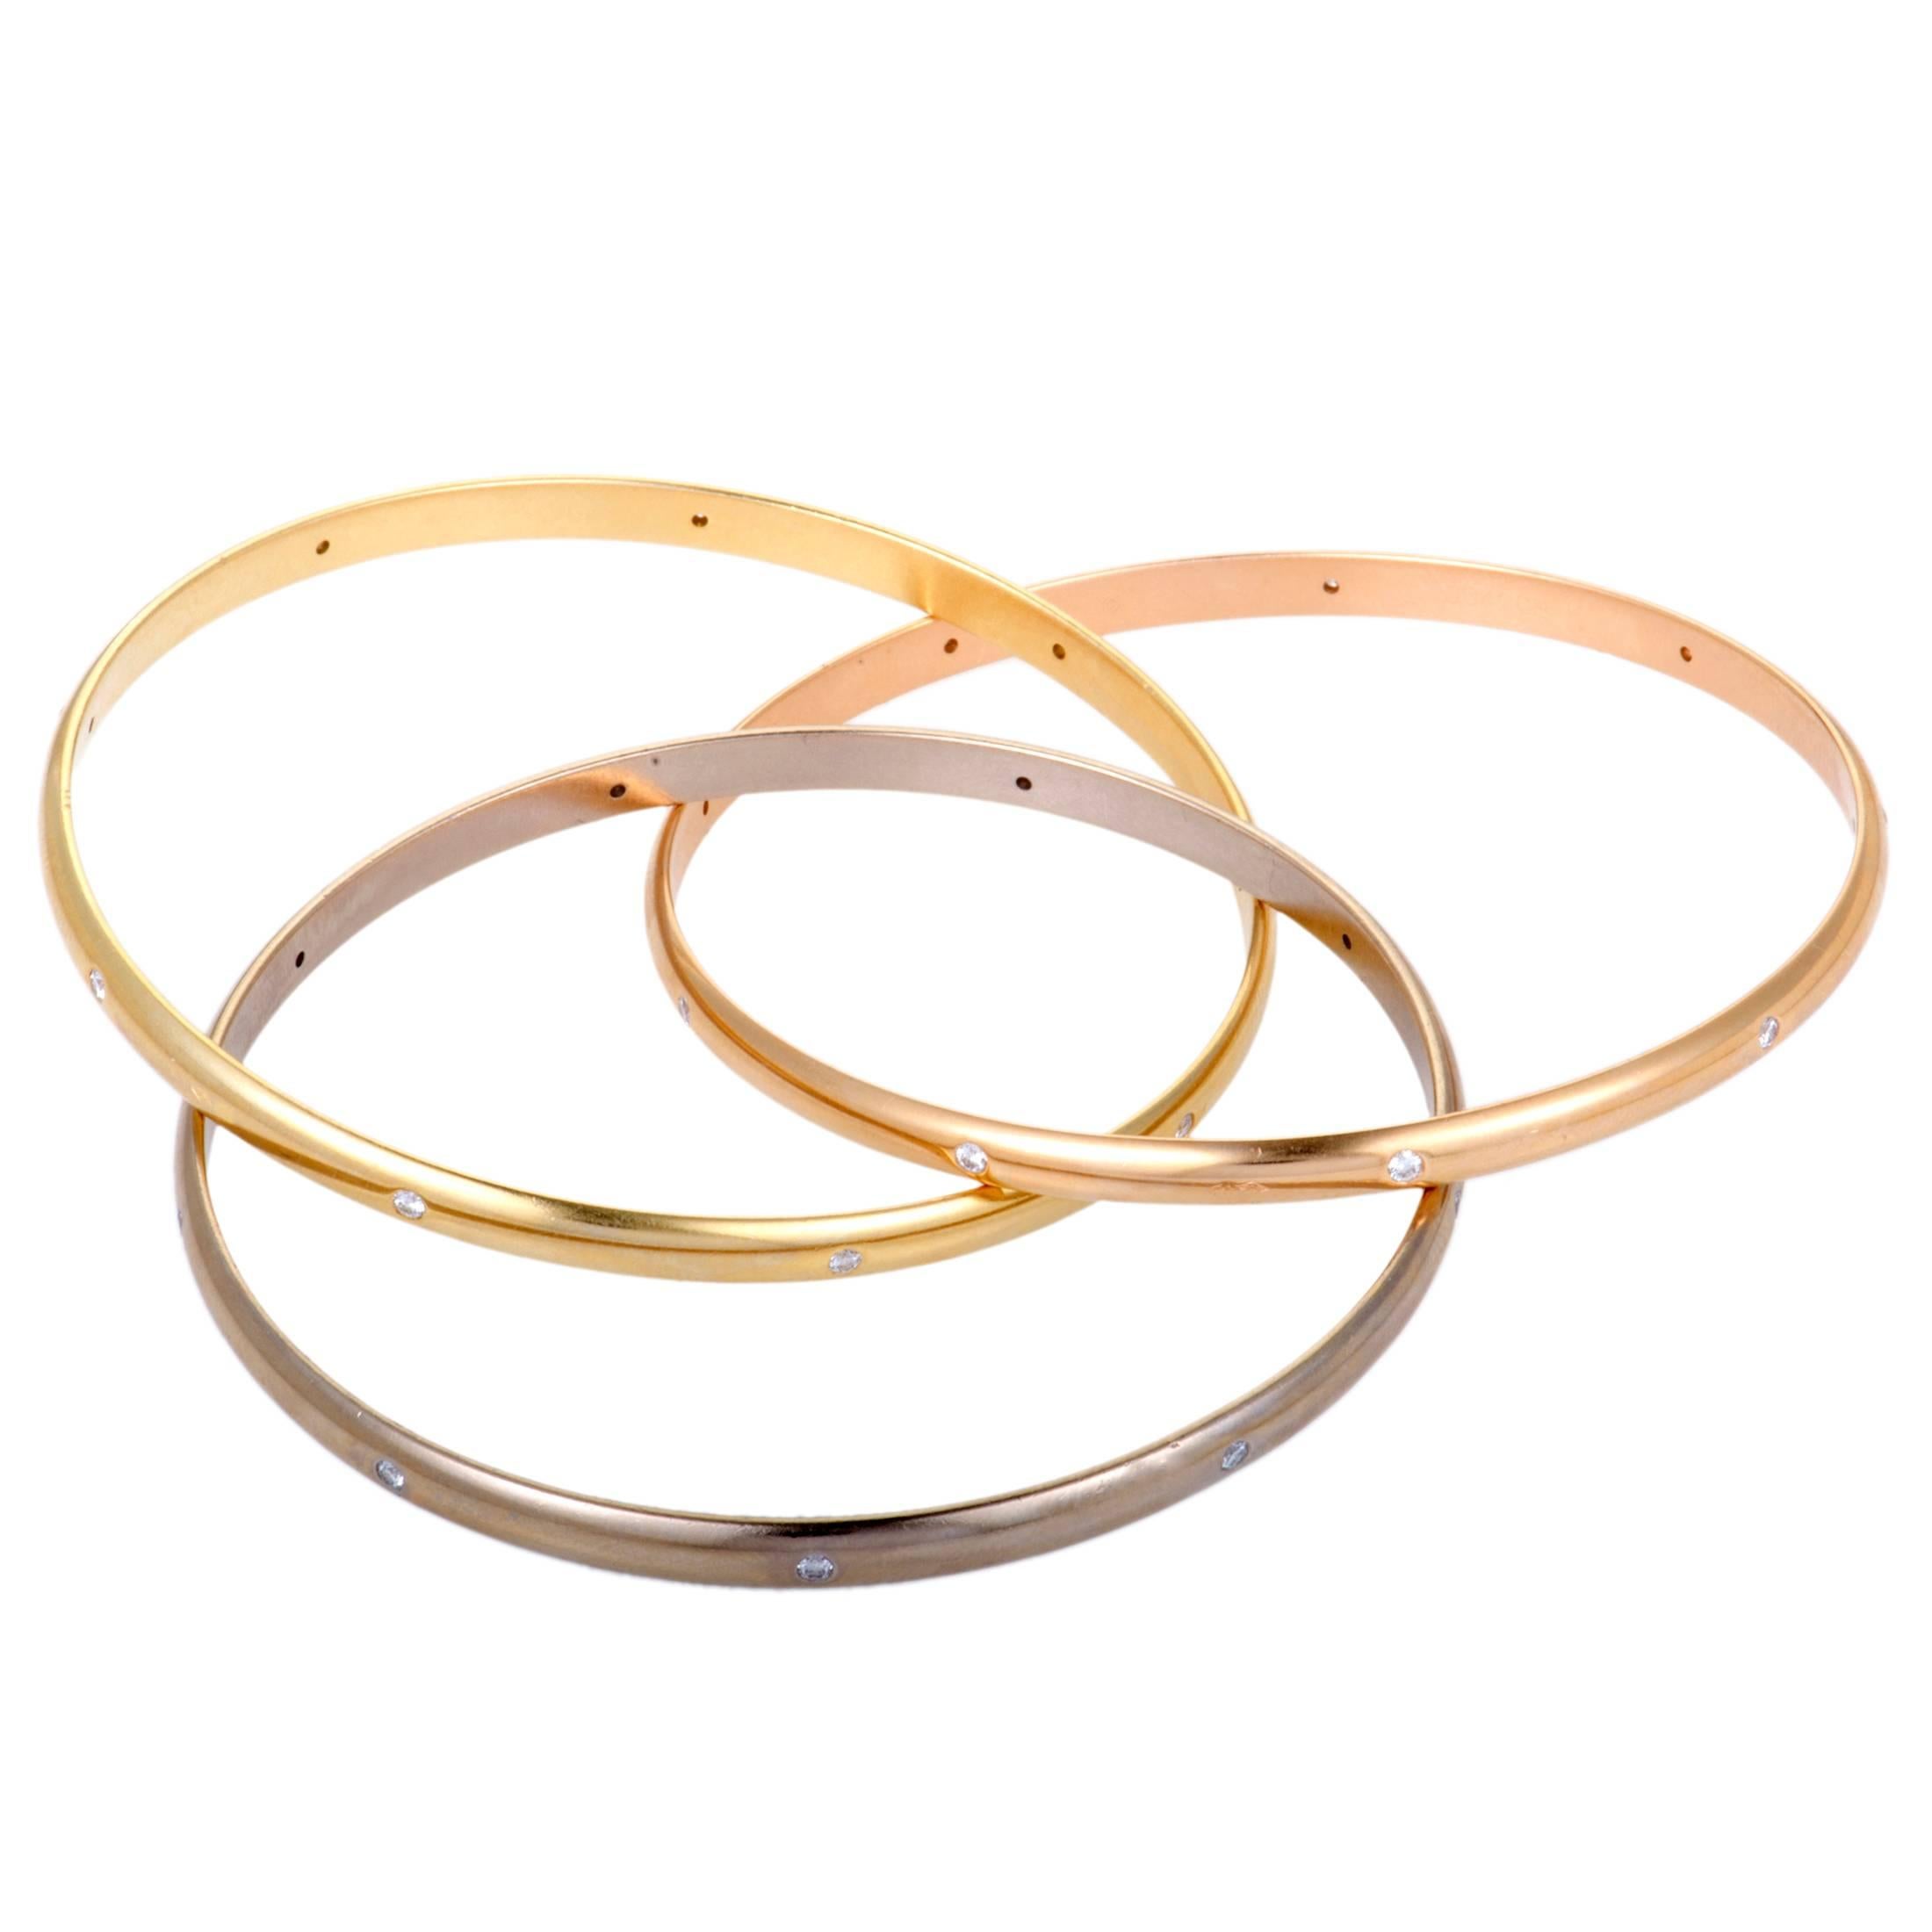 This gorgeous Cartier Trinity bangle bracelet is designed in the brand’s renowned fashion and offers a look that combines eye-catching style with timeless elegance. Each bangle is crafted from either 18K white, 18K yellow or 18K rose gold, and is